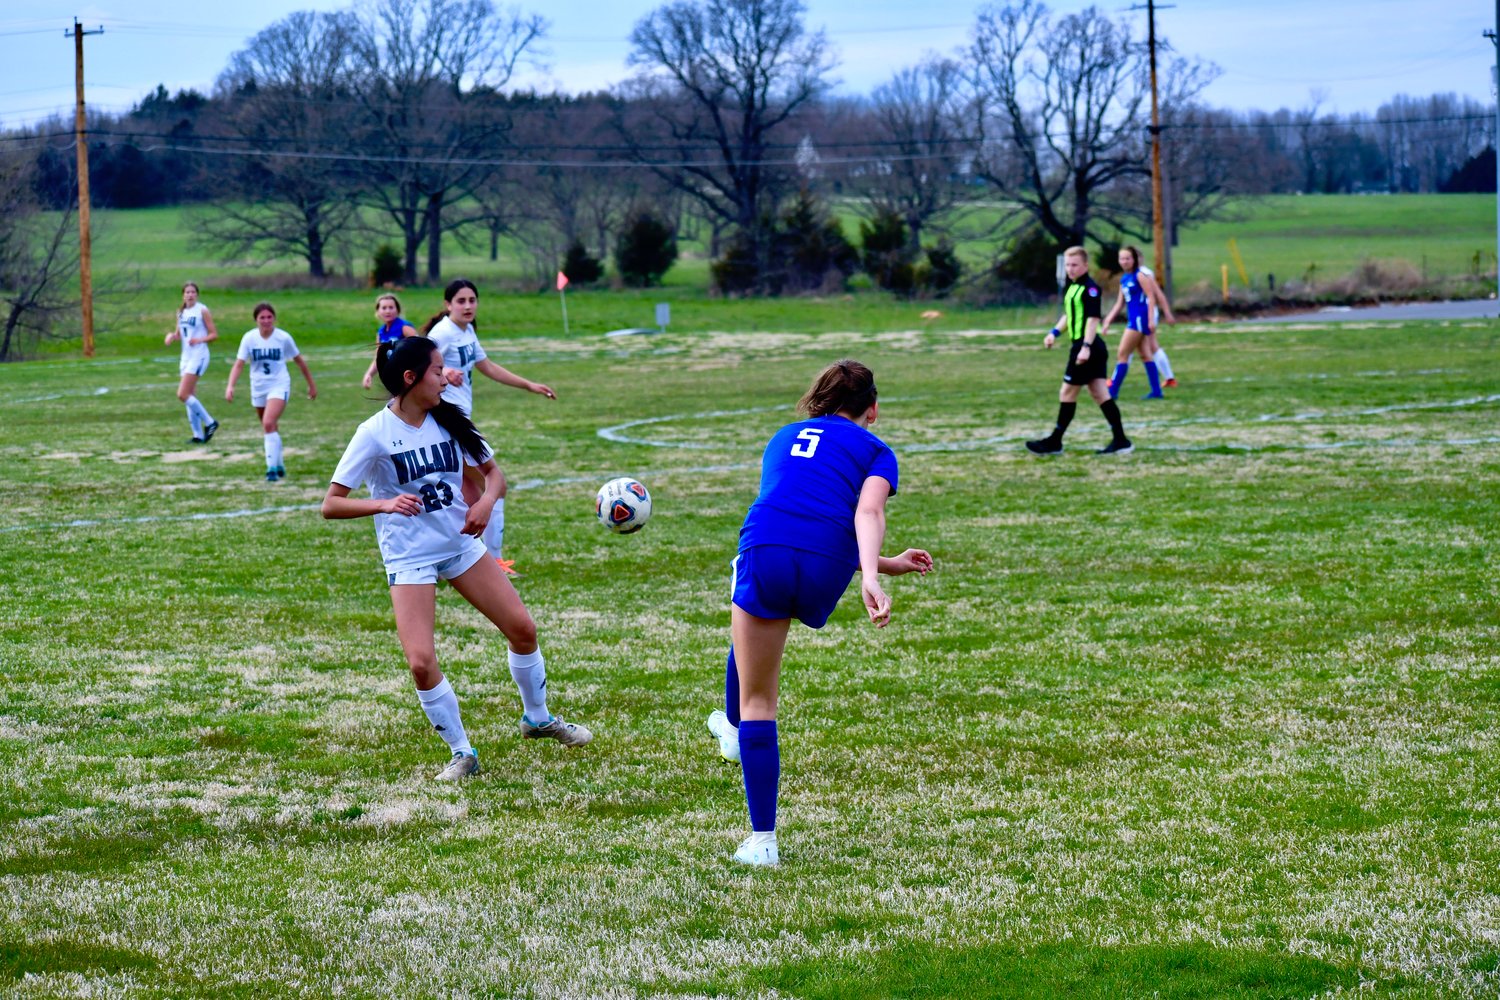 Ellen Garber threads the needle in a pass to London Wilson.